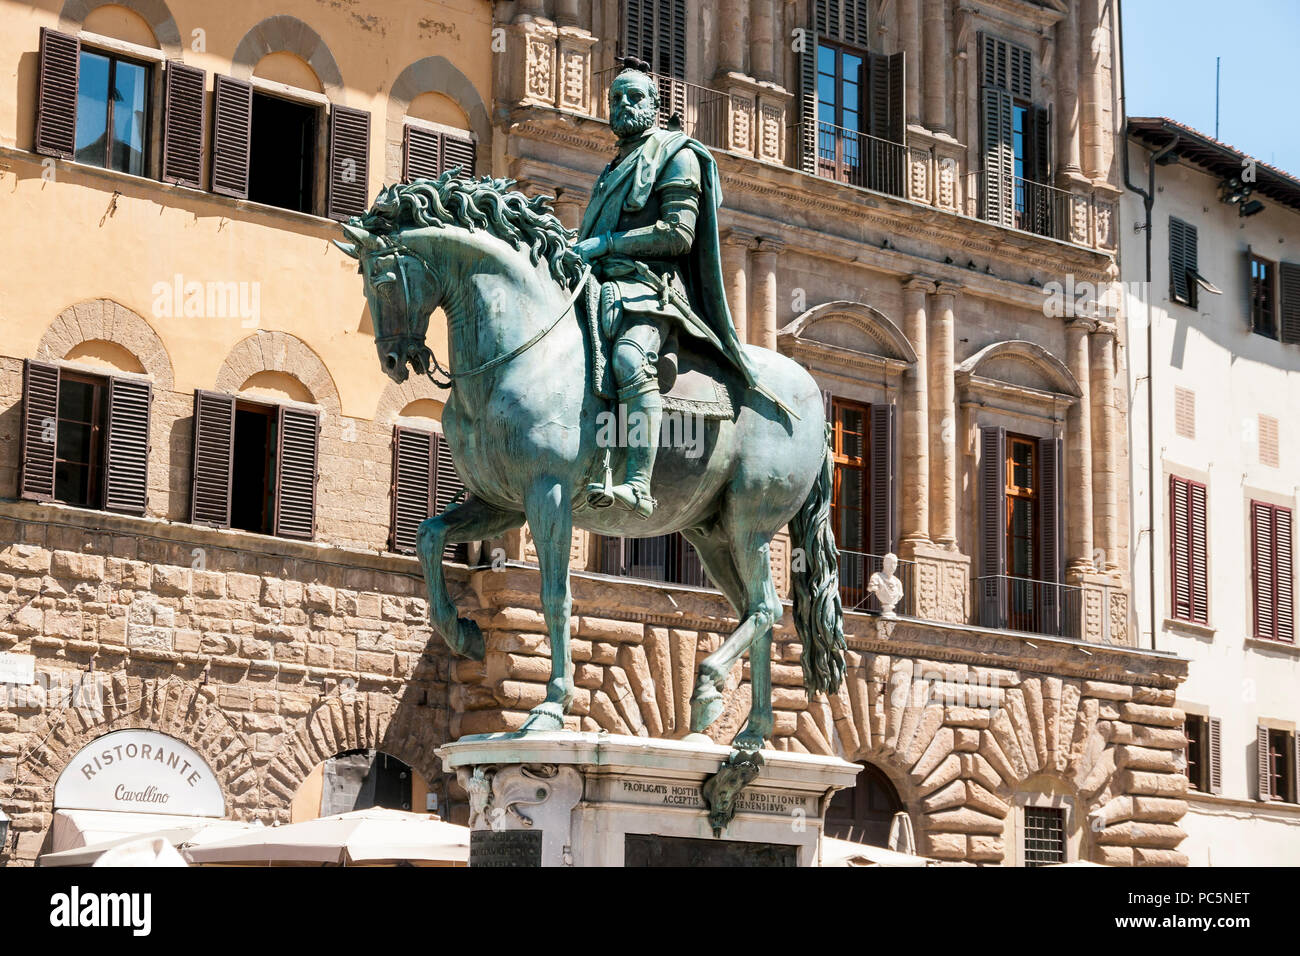 Equestrian statue of Cosimo de' Medici, Politician, banker, in the  Piazzale Michelangelo, Florence, Tuscany, Italy Stock Photo